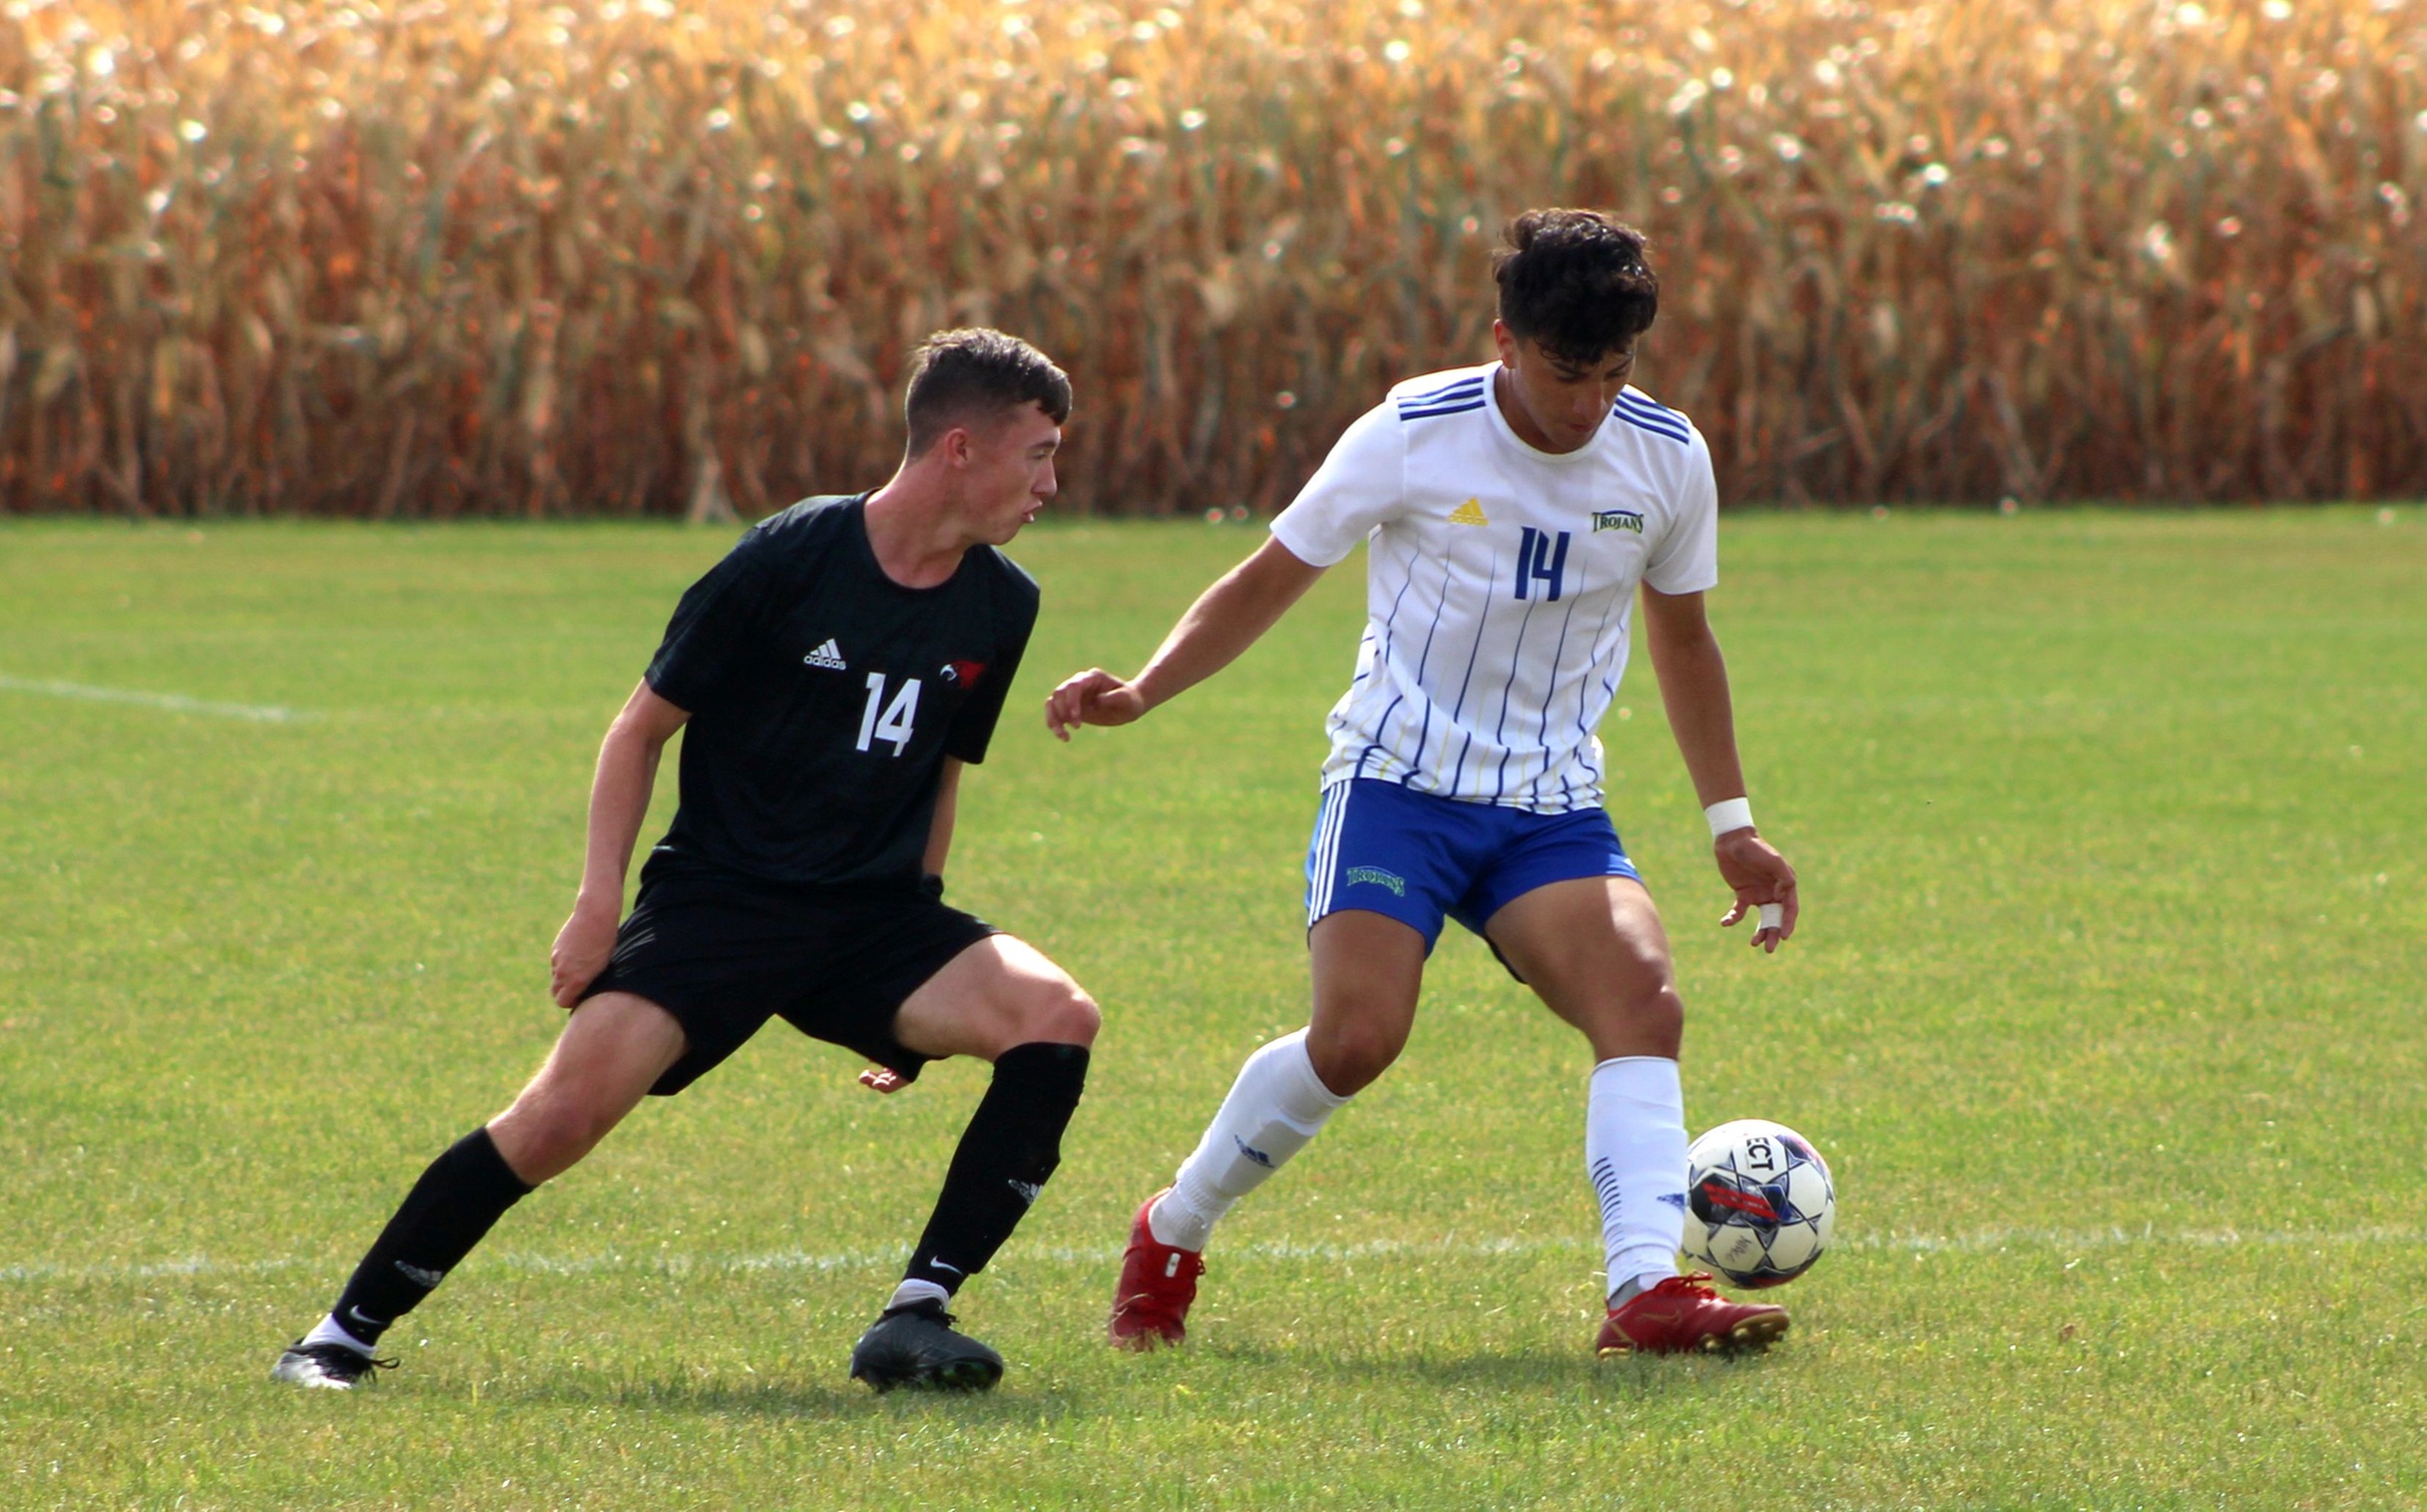 NIACC's Jonathan Morales (right) controls the ball during Tuesday's match against Northeast CC.